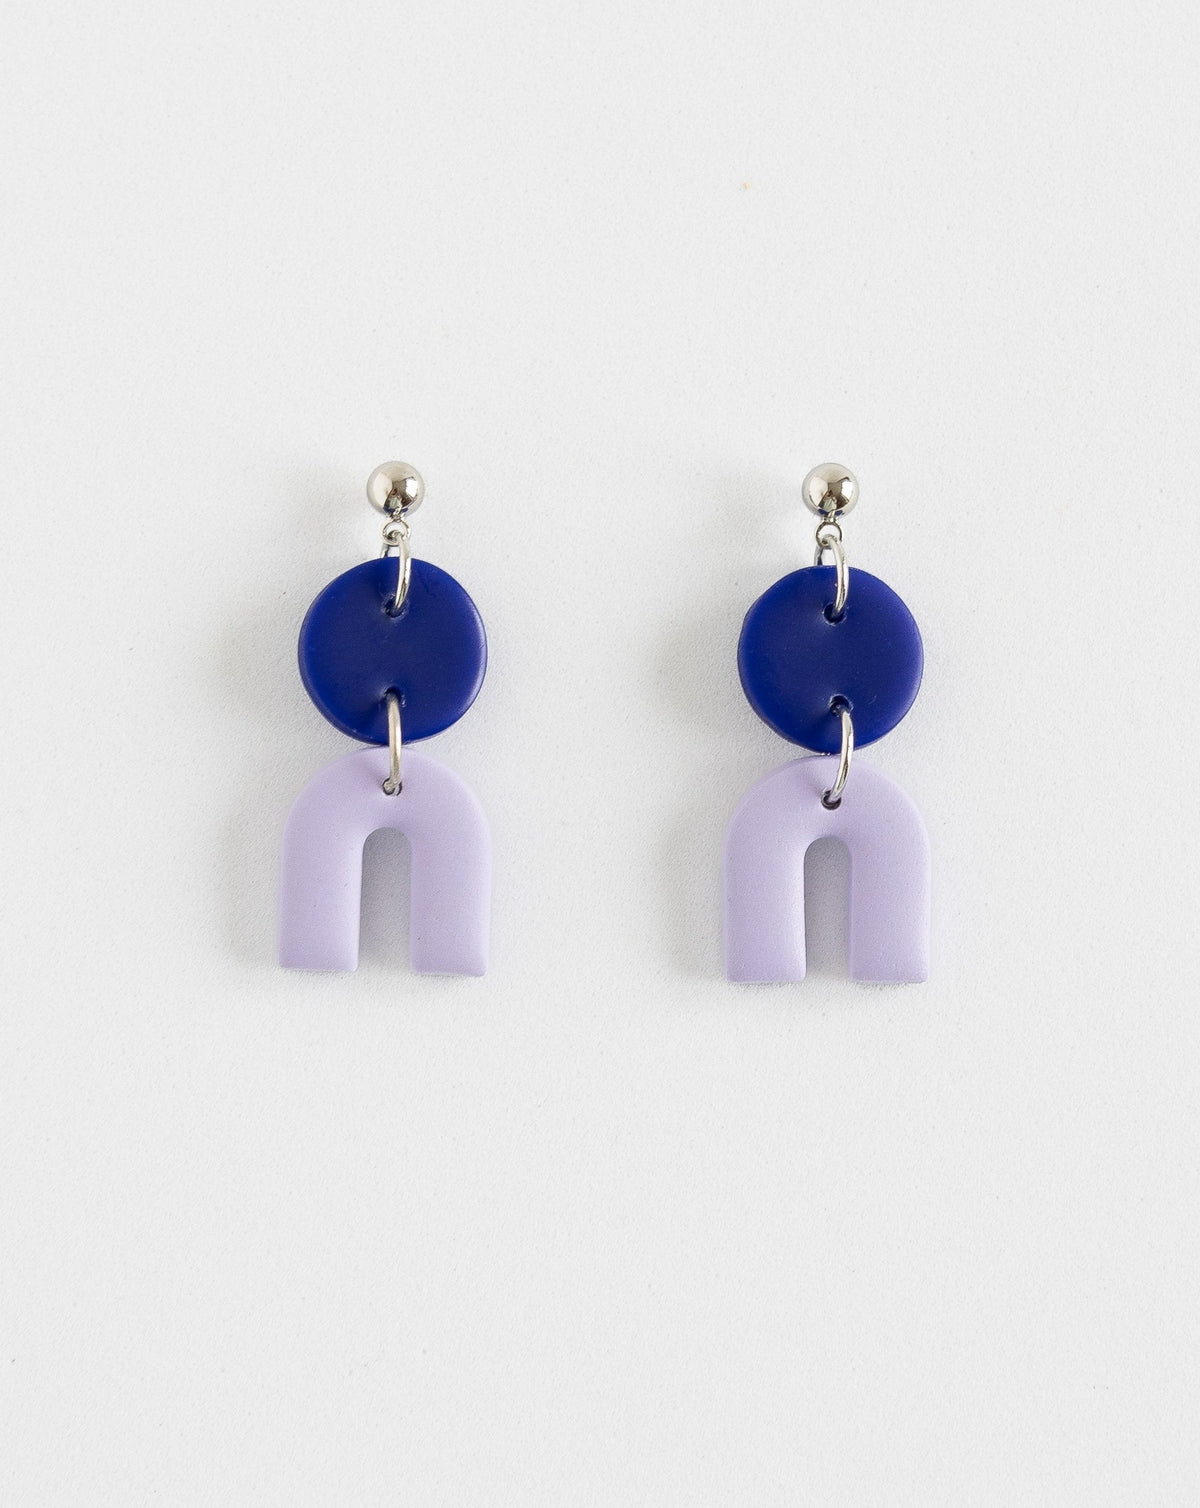 Tiny Arch earrings in two part of Hue Blue and lilac  clay parts with silver Ball studs, front view.